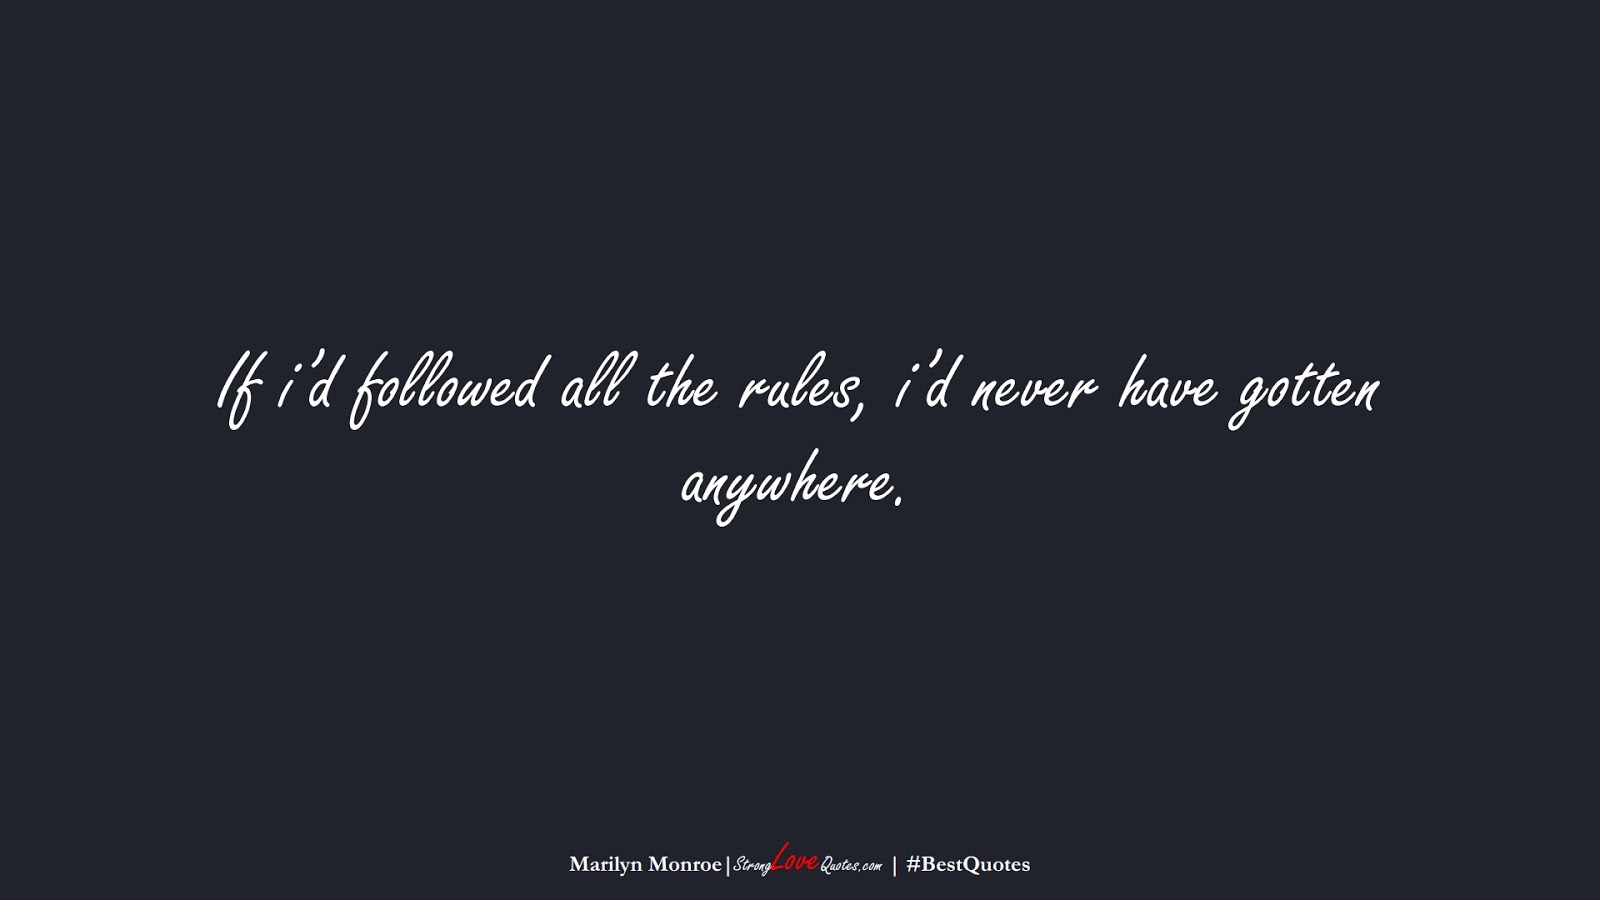 If i’d followed all the rules, i’d never have gotten anywhere. (Marilyn Monroe);  #BestQuotes